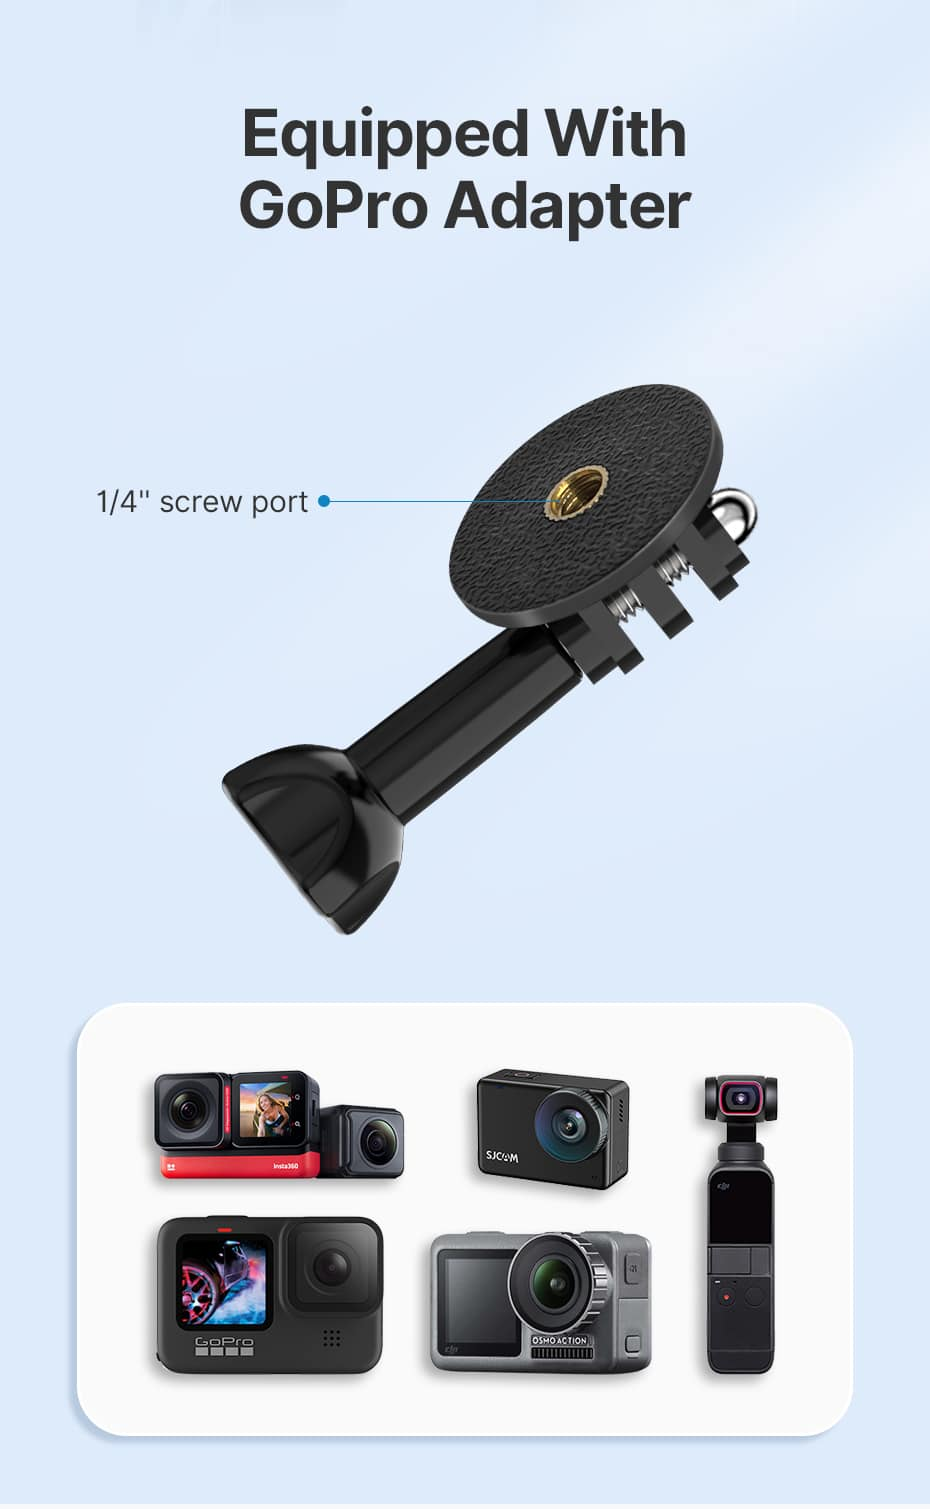 Ulanzi MP-5 Bicycle Mount for smartphone and GoPro